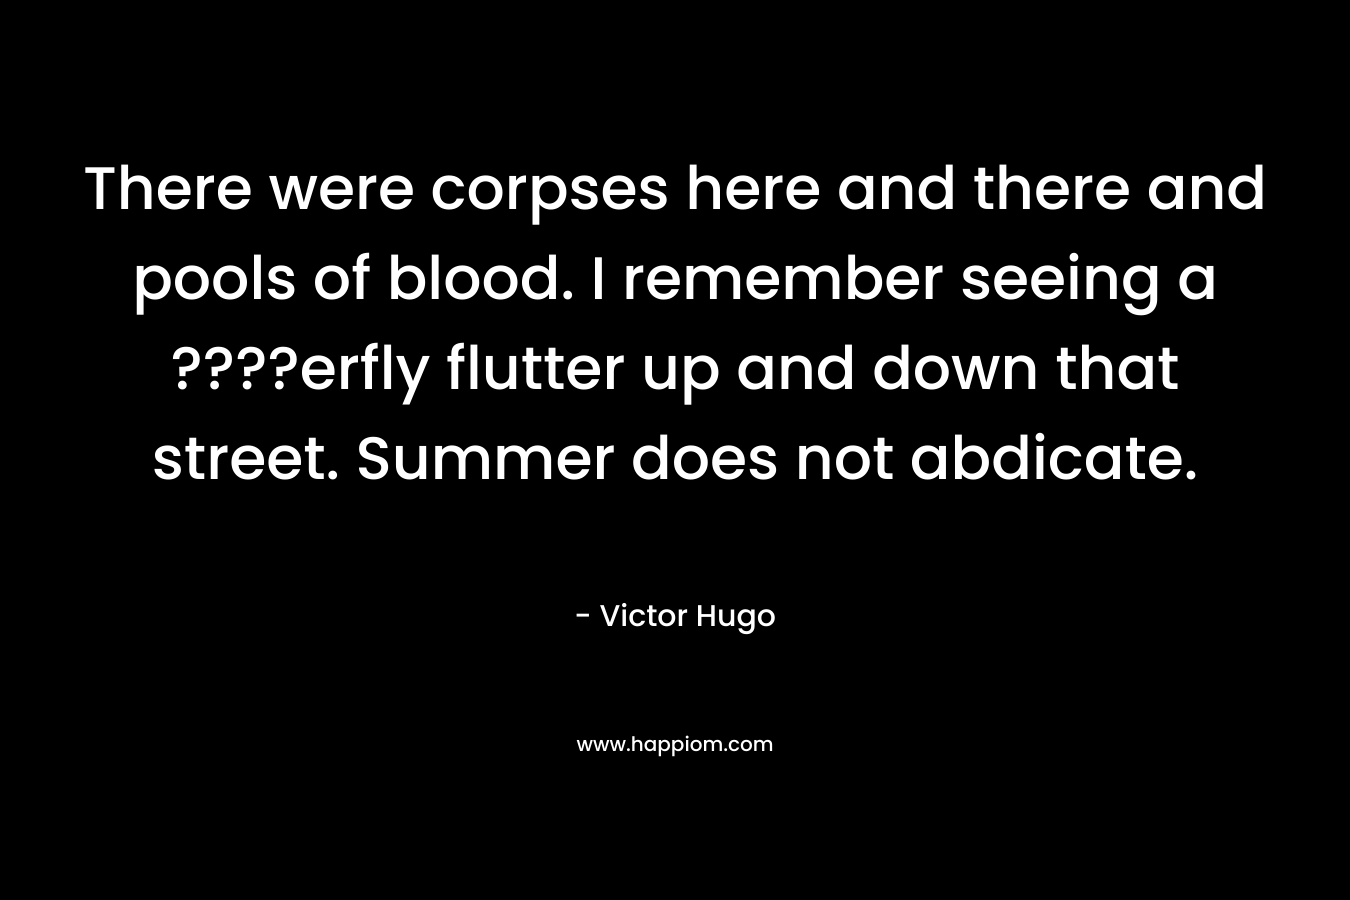 There were corpses here and there and pools of blood. I remember seeing a ????erfly flutter up and down that street. Summer does not abdicate. – Victor Hugo